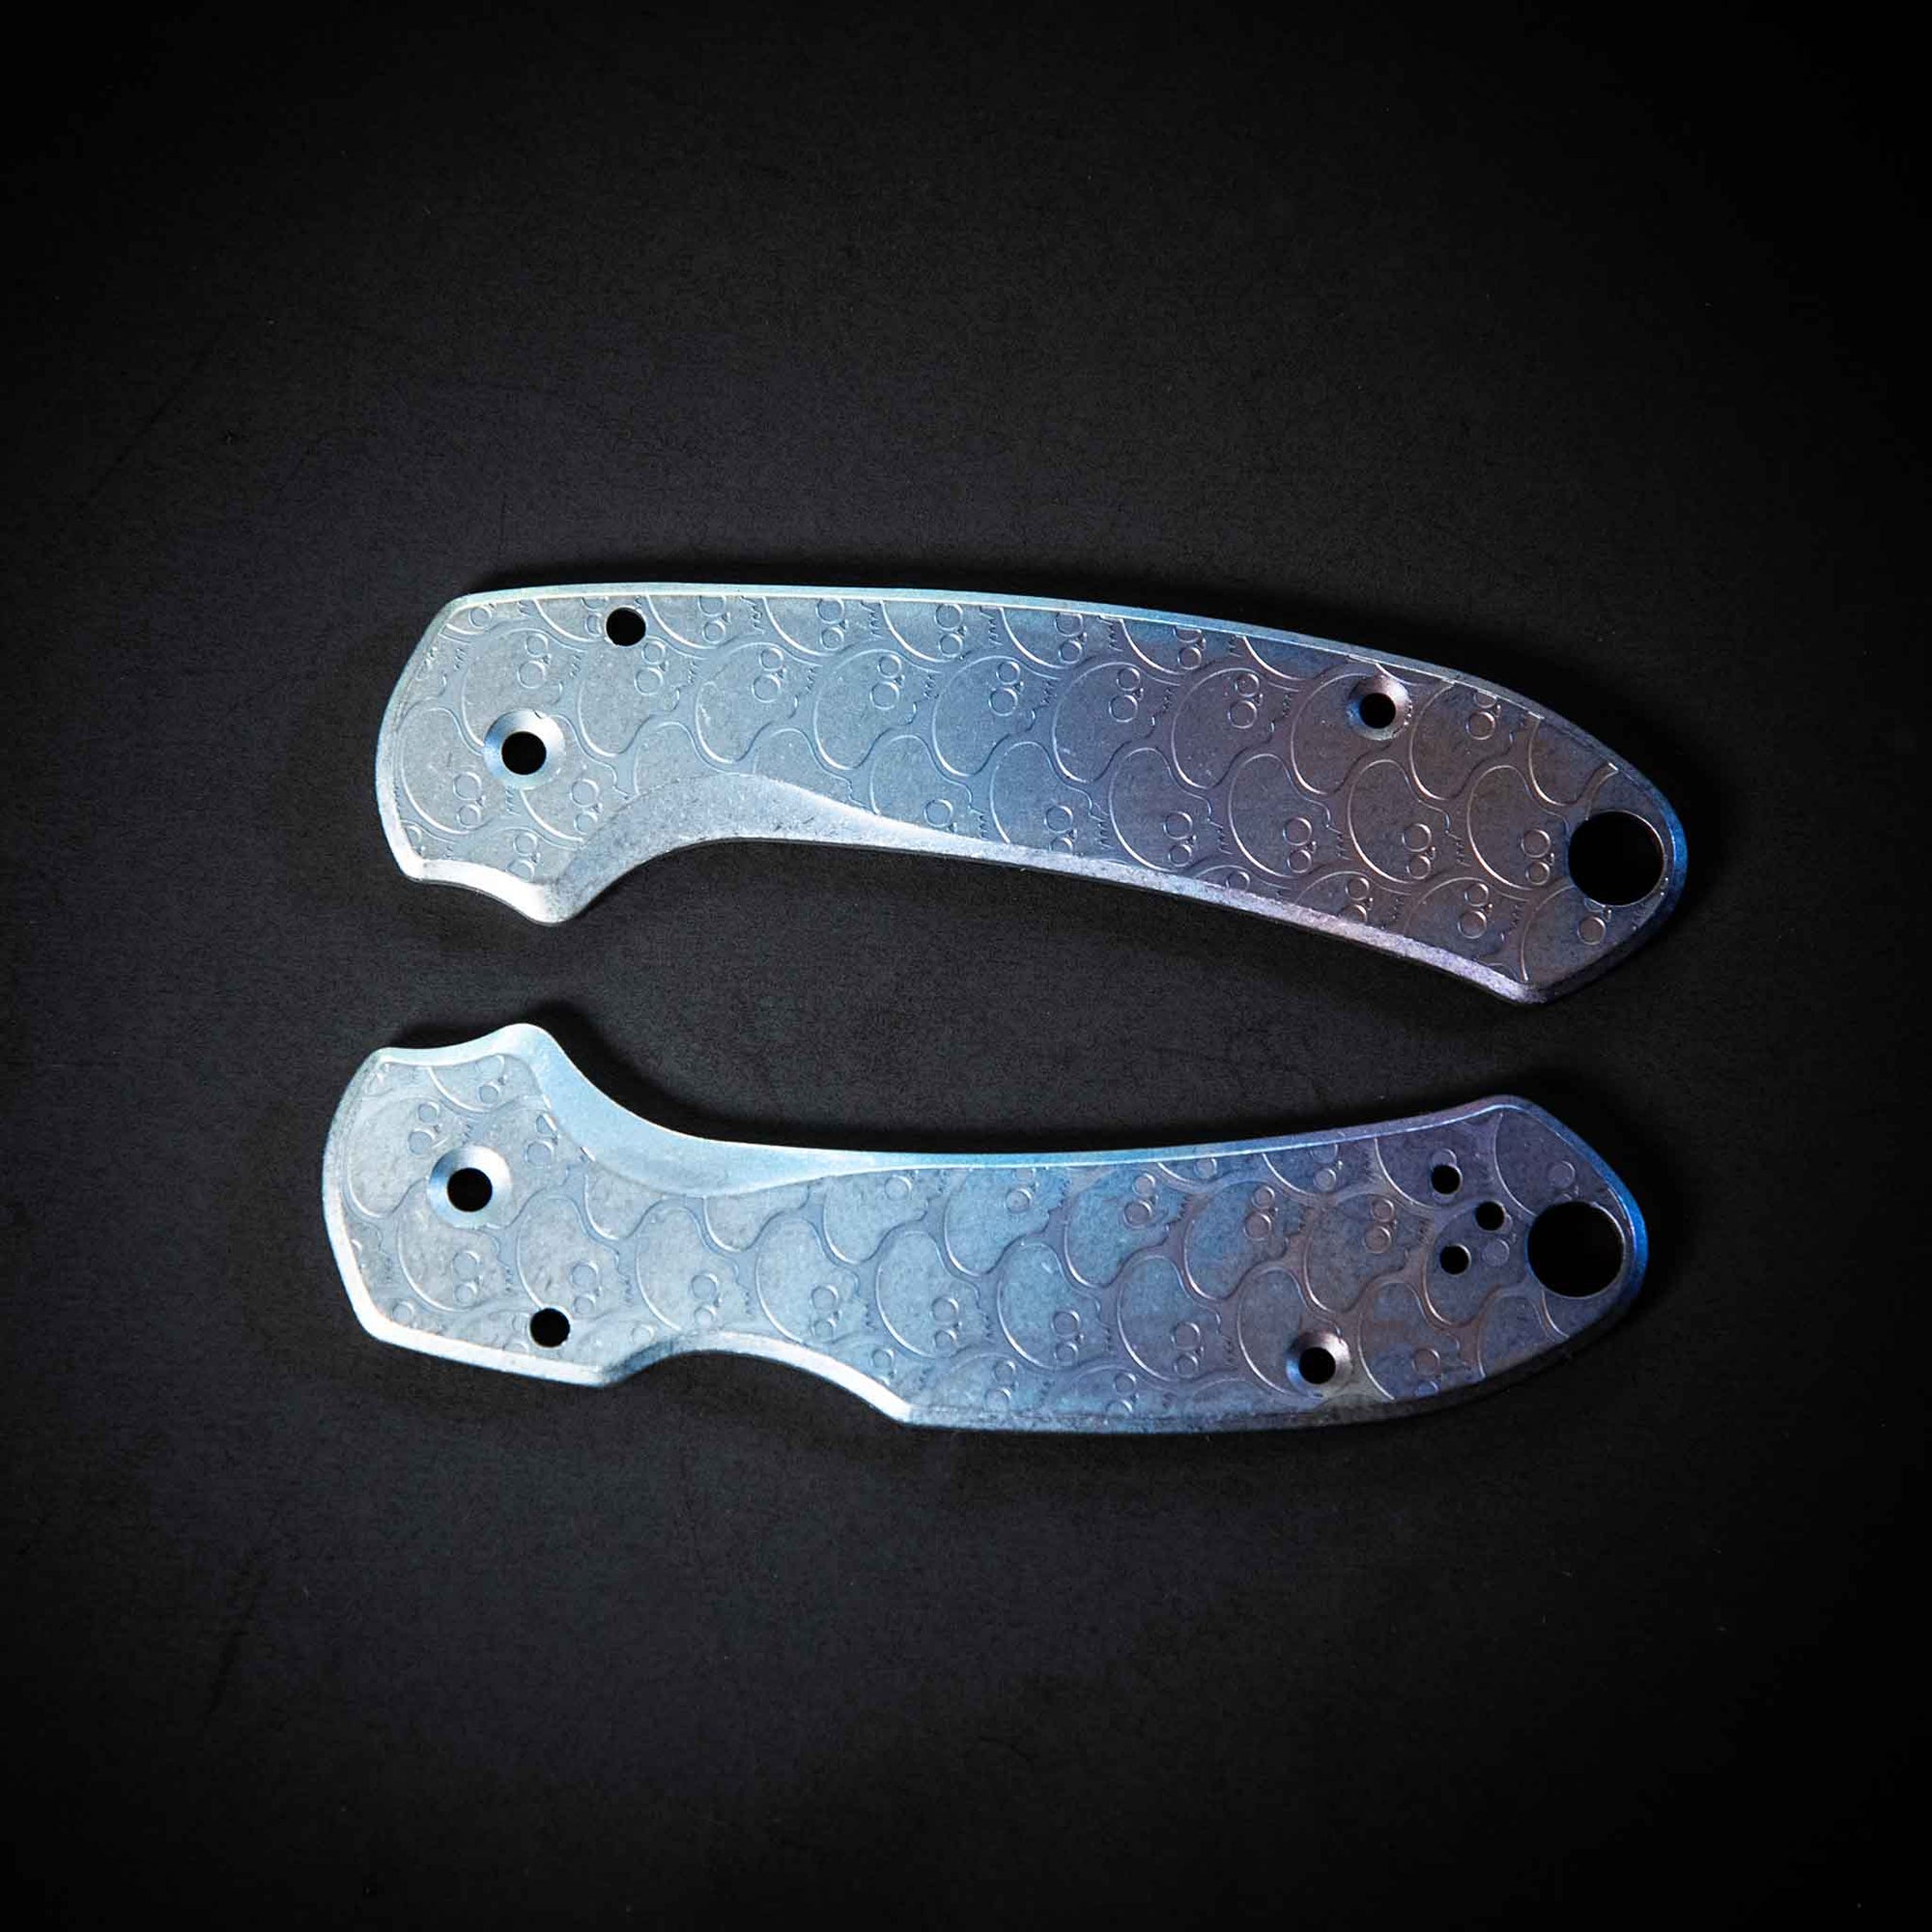 Flytanium X PLAYGE - Cold Fade Ano Titanium Scales for Spyderco Para 3